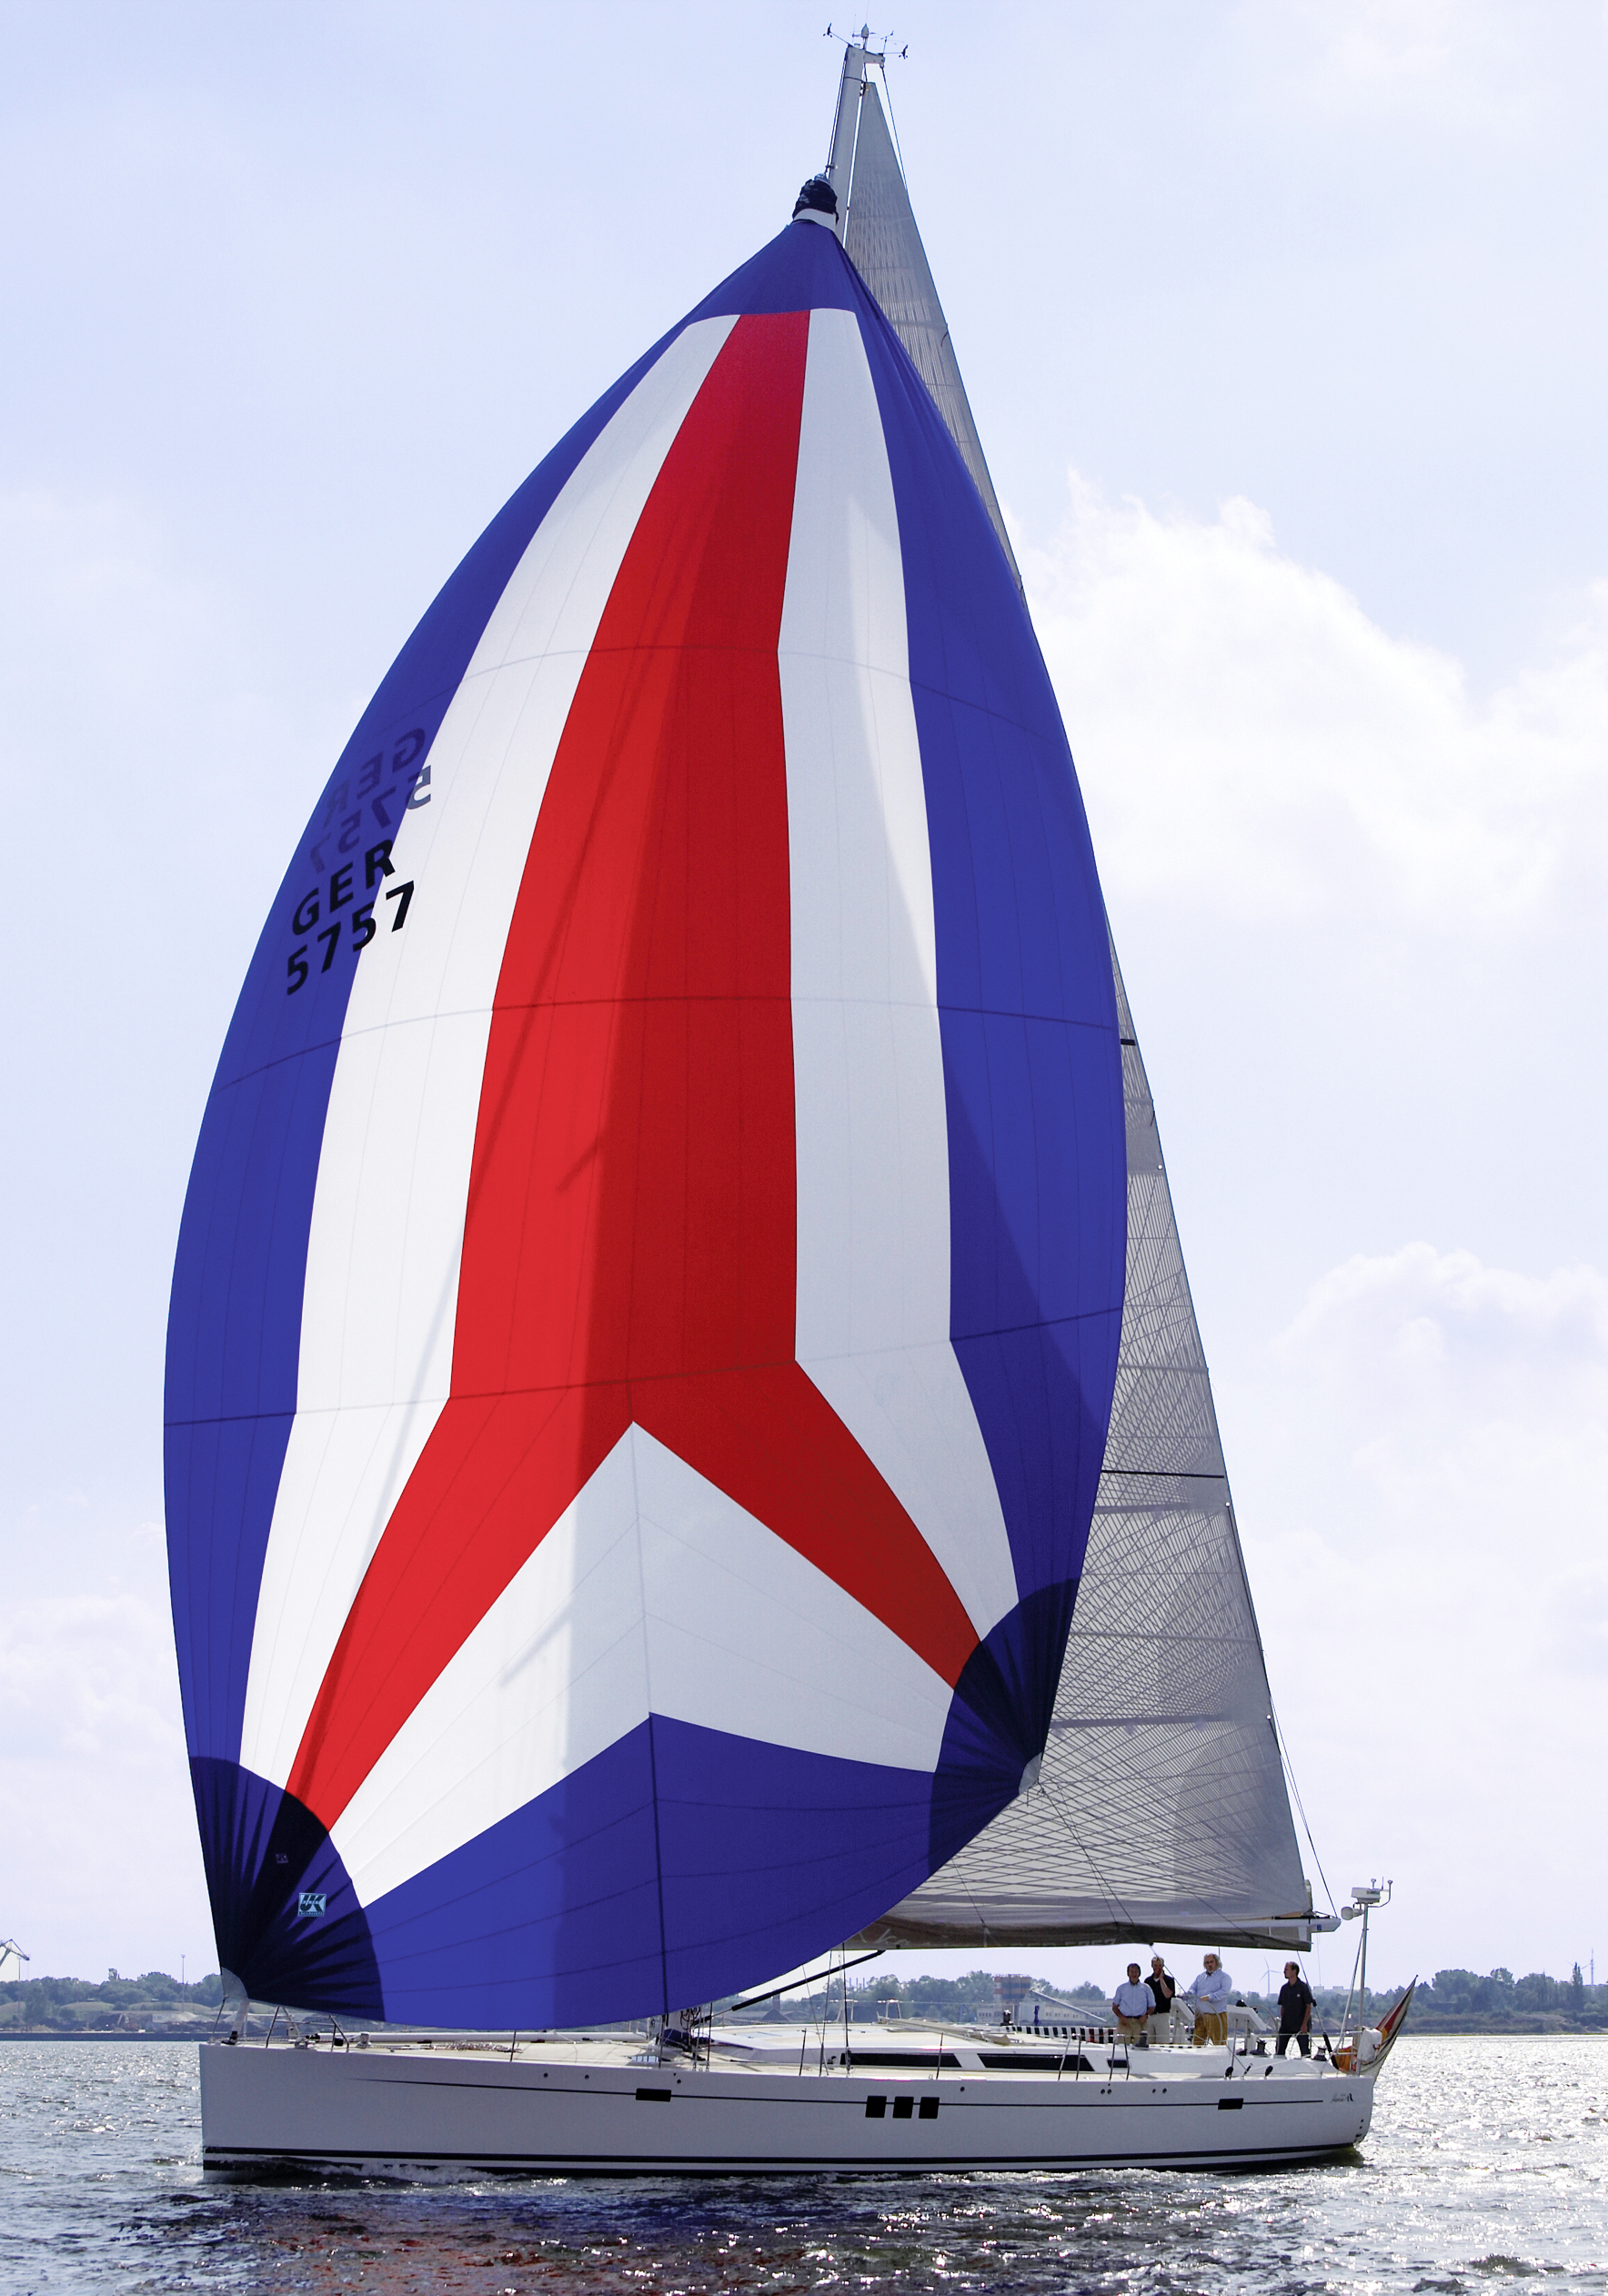 UK Sailmakers cruising spinnaker makes downwind sailing more fun on boats of all sizes.